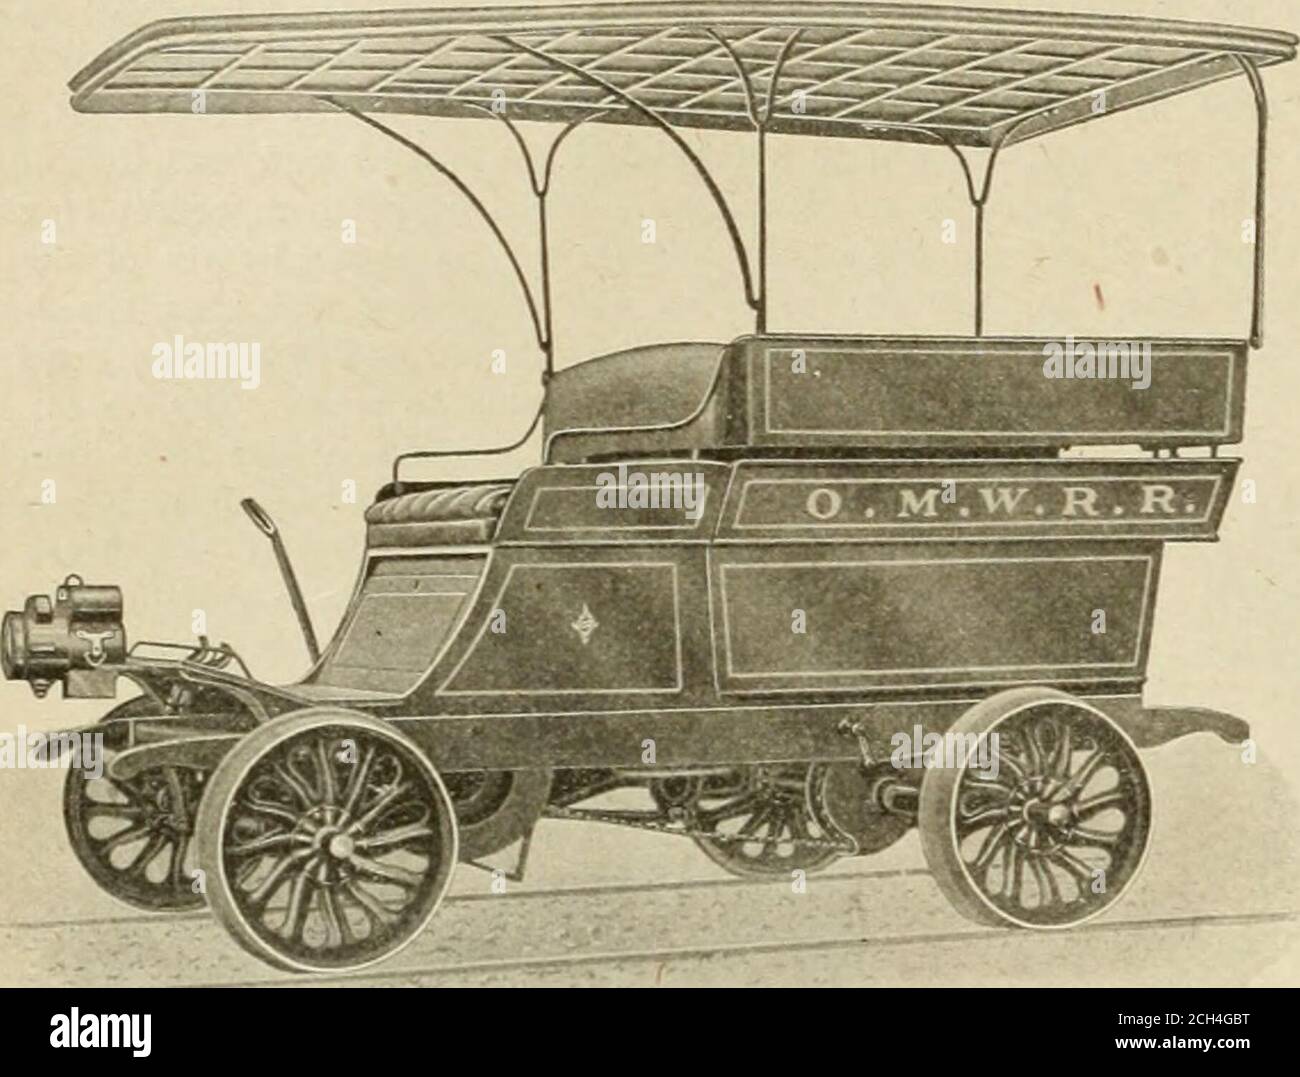 . American engineer and railroad journal . amp; rail Railroad, with neadqnarteri at Cleveland, . Iceed Mr. J. T. CarrolL 34 AMERICAN ENGINEER AND RAILROAD JOURNAL. OLDSMOBILE INSPECTION CAR. This illustration shows a new type of inspection car, knownas Model No. 2, tonneau car. It is, in general, similar to theOldsmobile railroad inspection car No. 1, except that it has atonneau added, giving a capacity of eight passengers. Thetonneau may be removed and replaced by a platform, to carrymen and tools for ordinary repair work. This car Is driven oiled by the drip which it catches from the other e Stock Photo